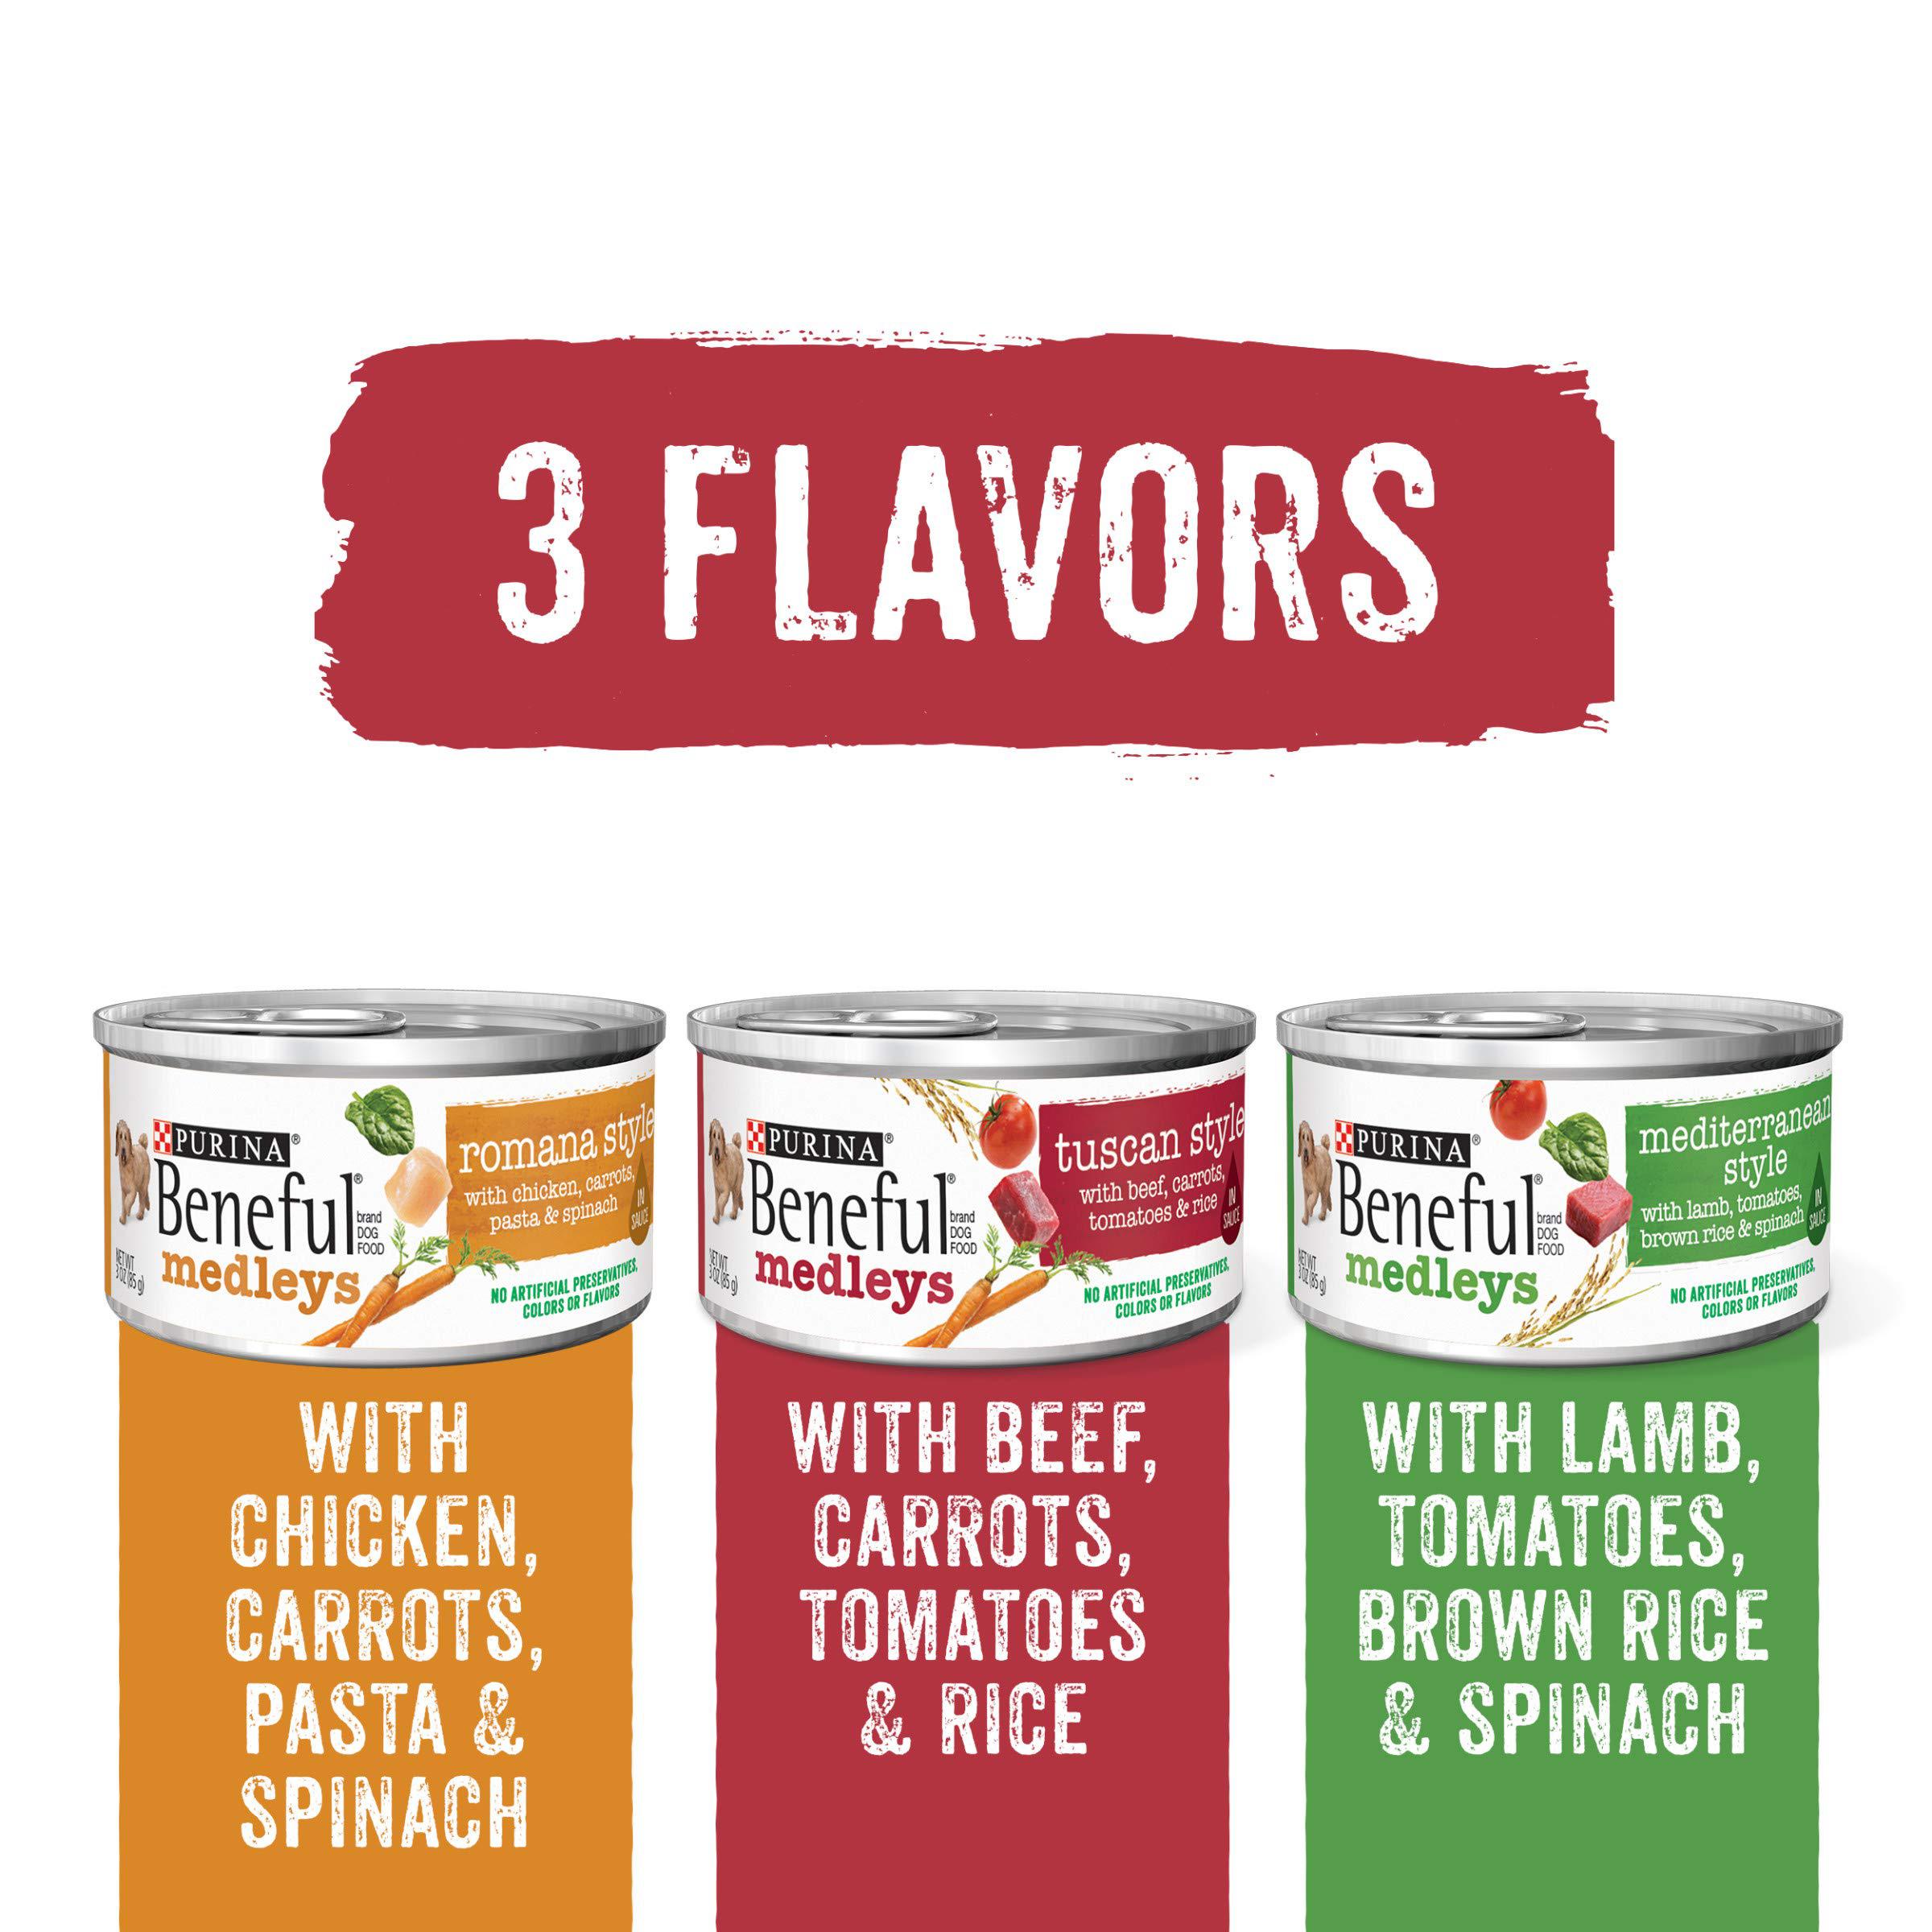 Beneful purina beneful wet dog food variety pack, medleys tuscan, romana & mediterranean style - (2 packs of 12) 3 oz. cans